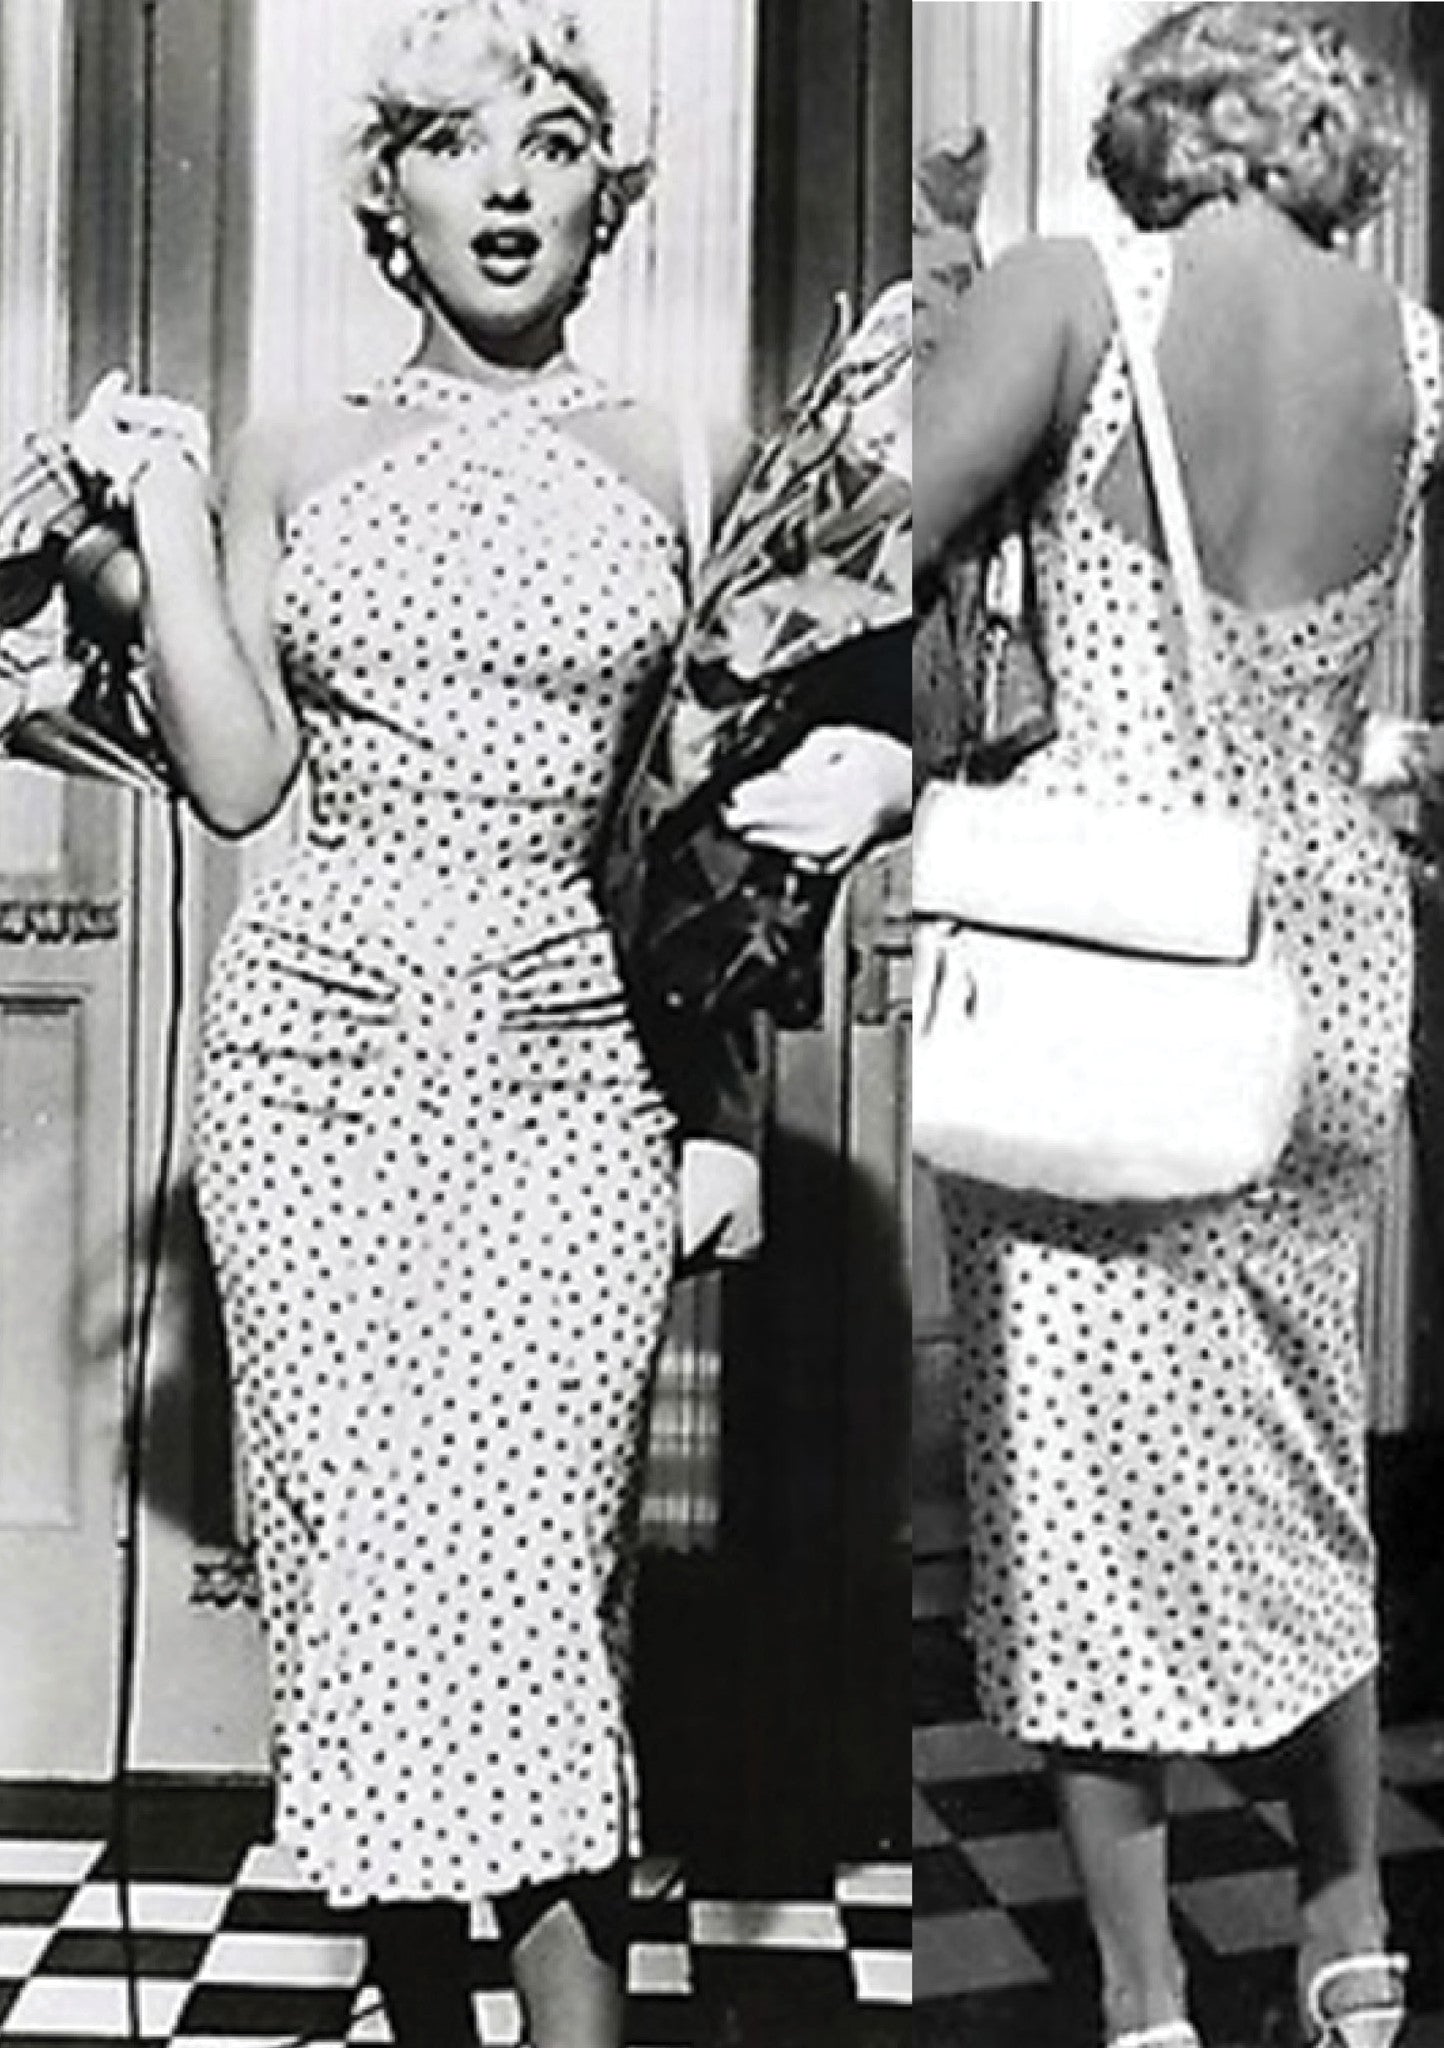 Recreation of Marilyn Monroe's White & Black Spot Day Dress - New! –  Coutura Vintage